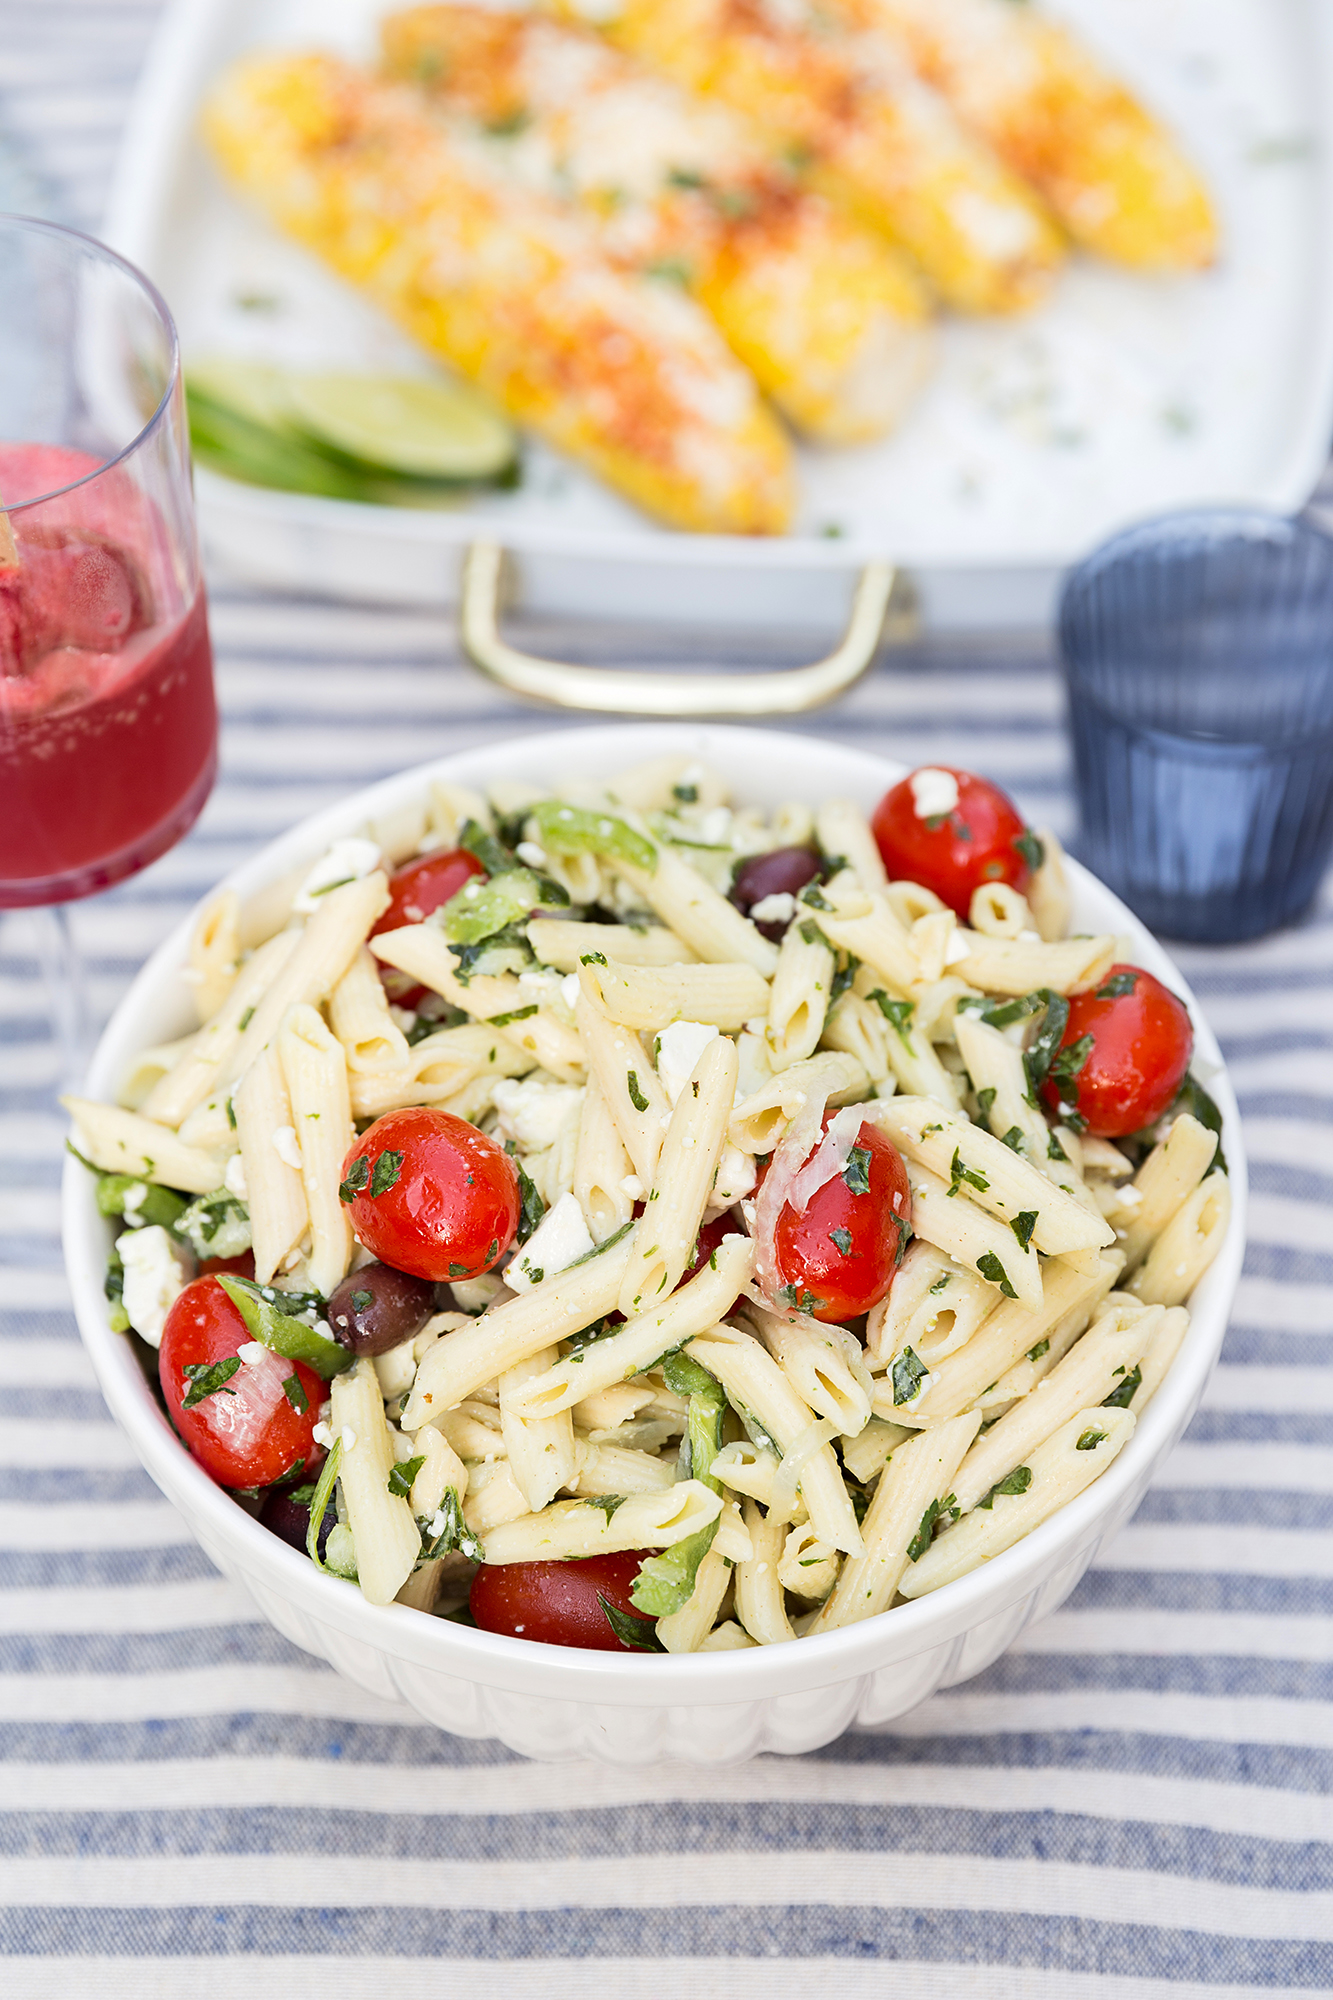 One Stylish Party Greek Pasta Salad in a White Bowl